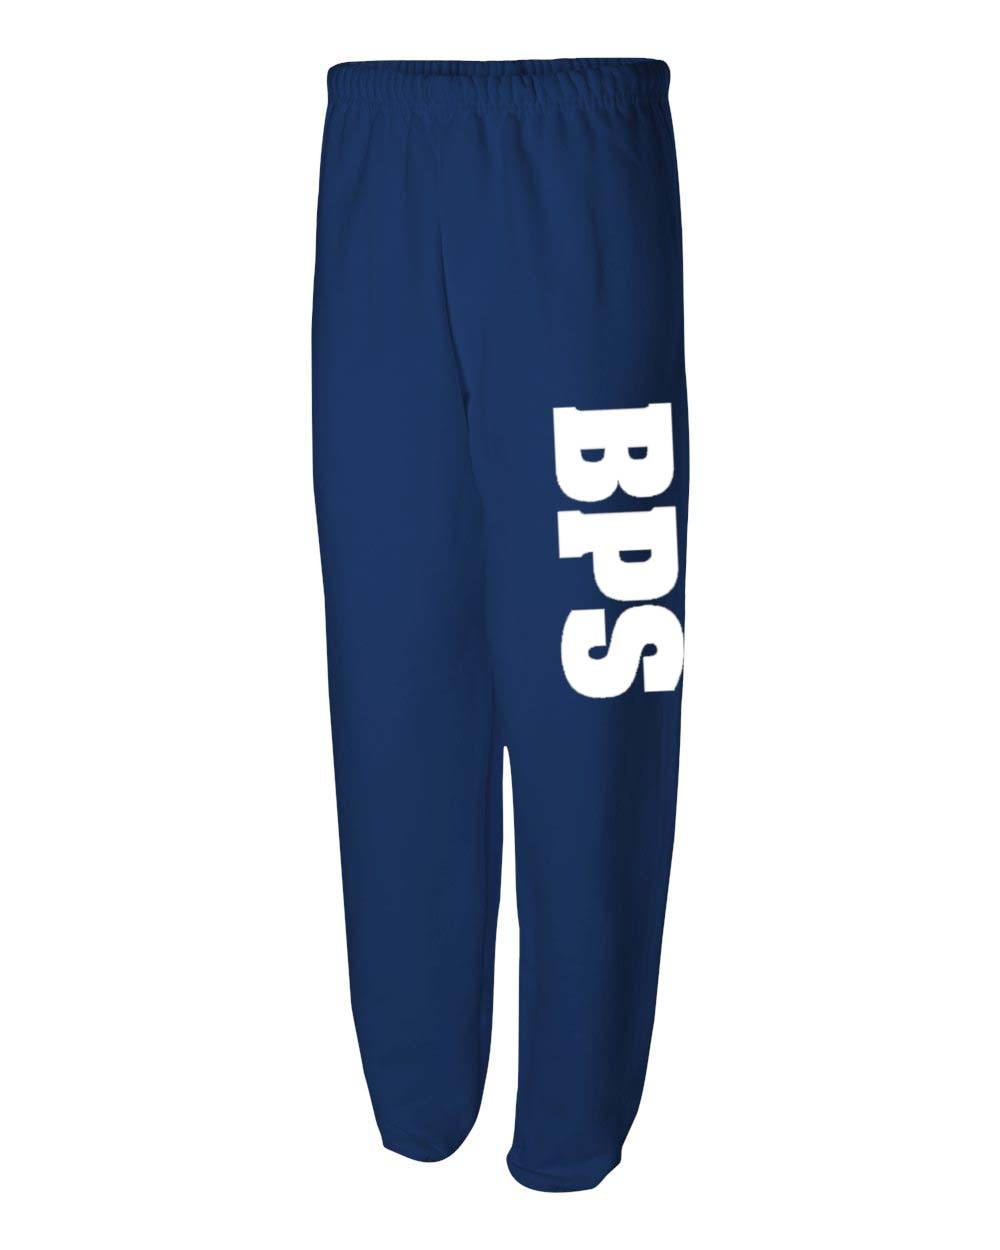 BPS Sweat Pants w/ White Logo - Please Allow 2-3 Weeks for Delivery